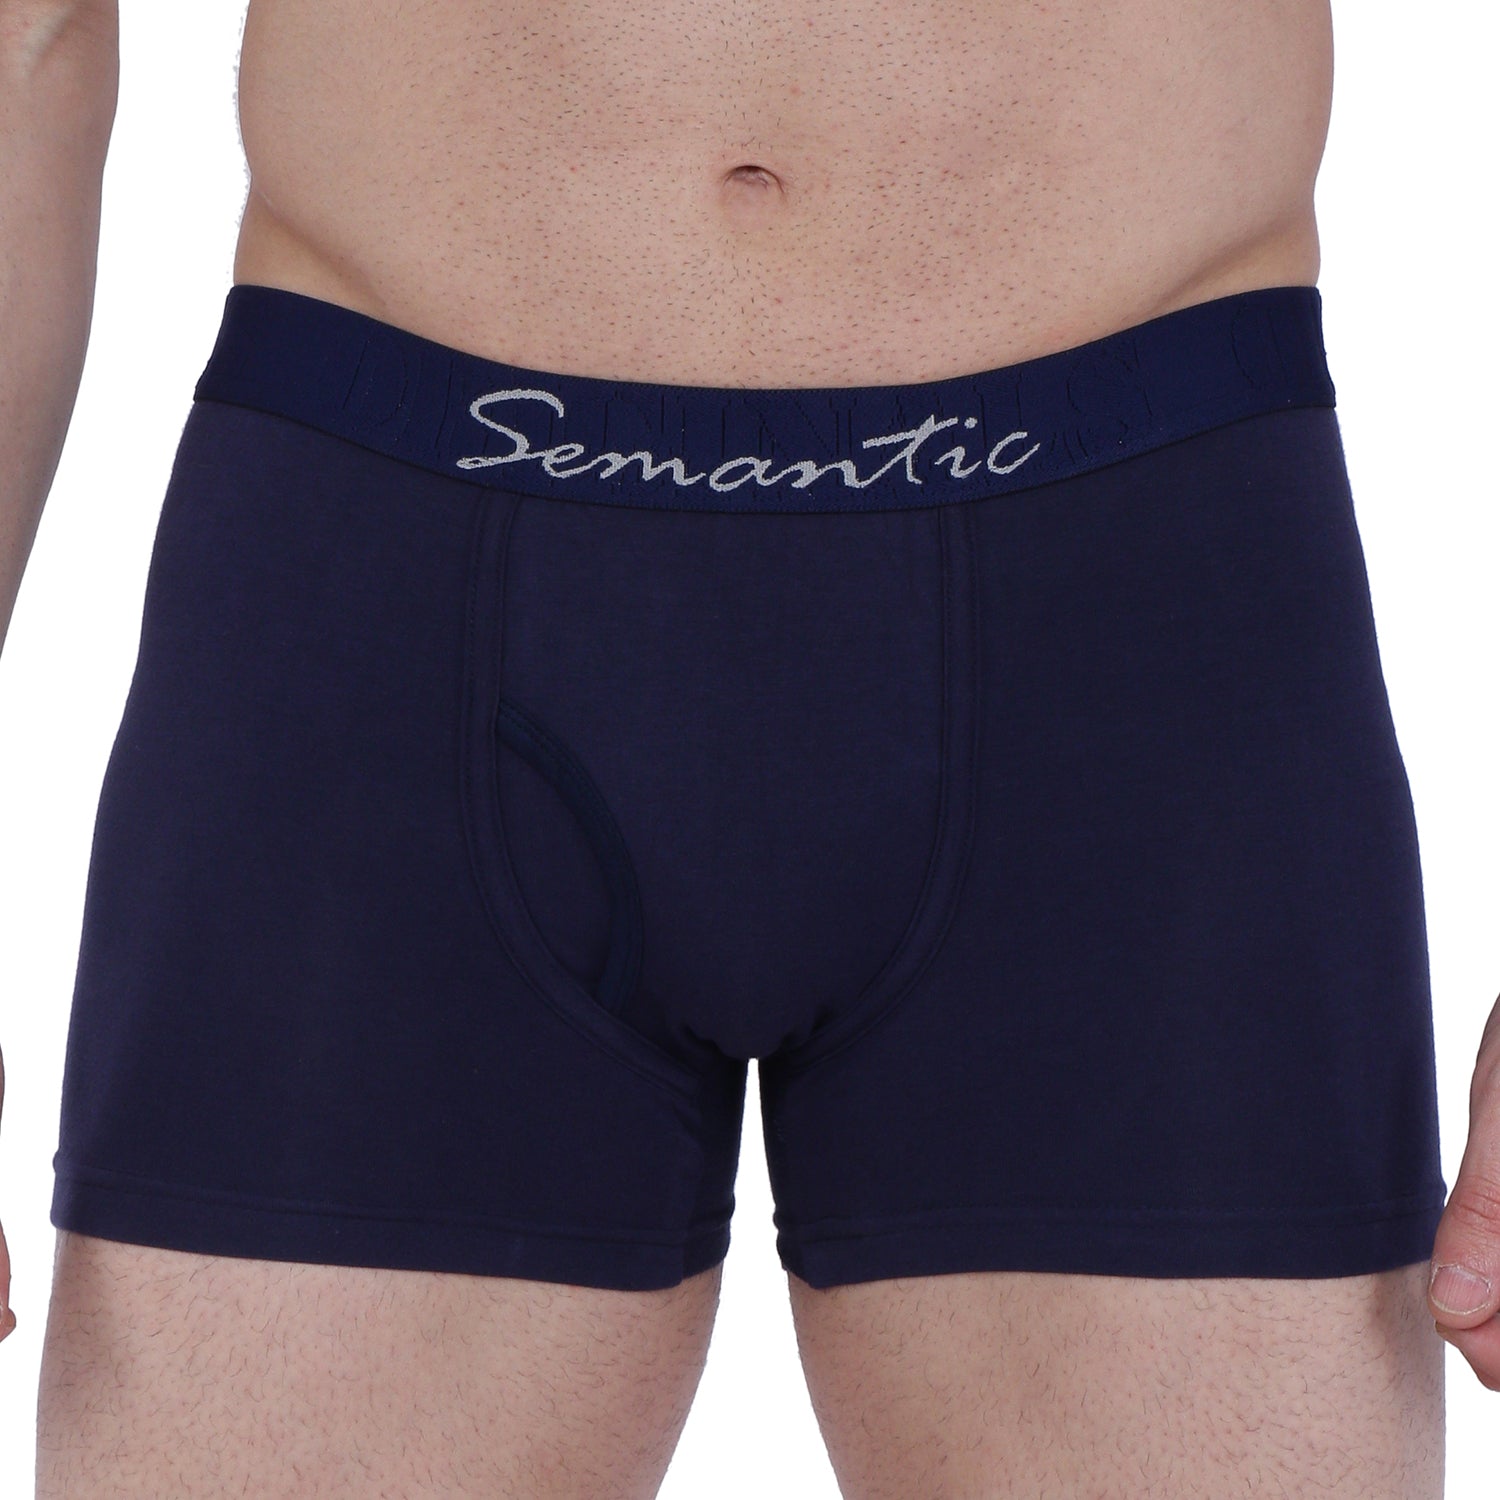 Semantic Cotton Trunks with Fly - Solid